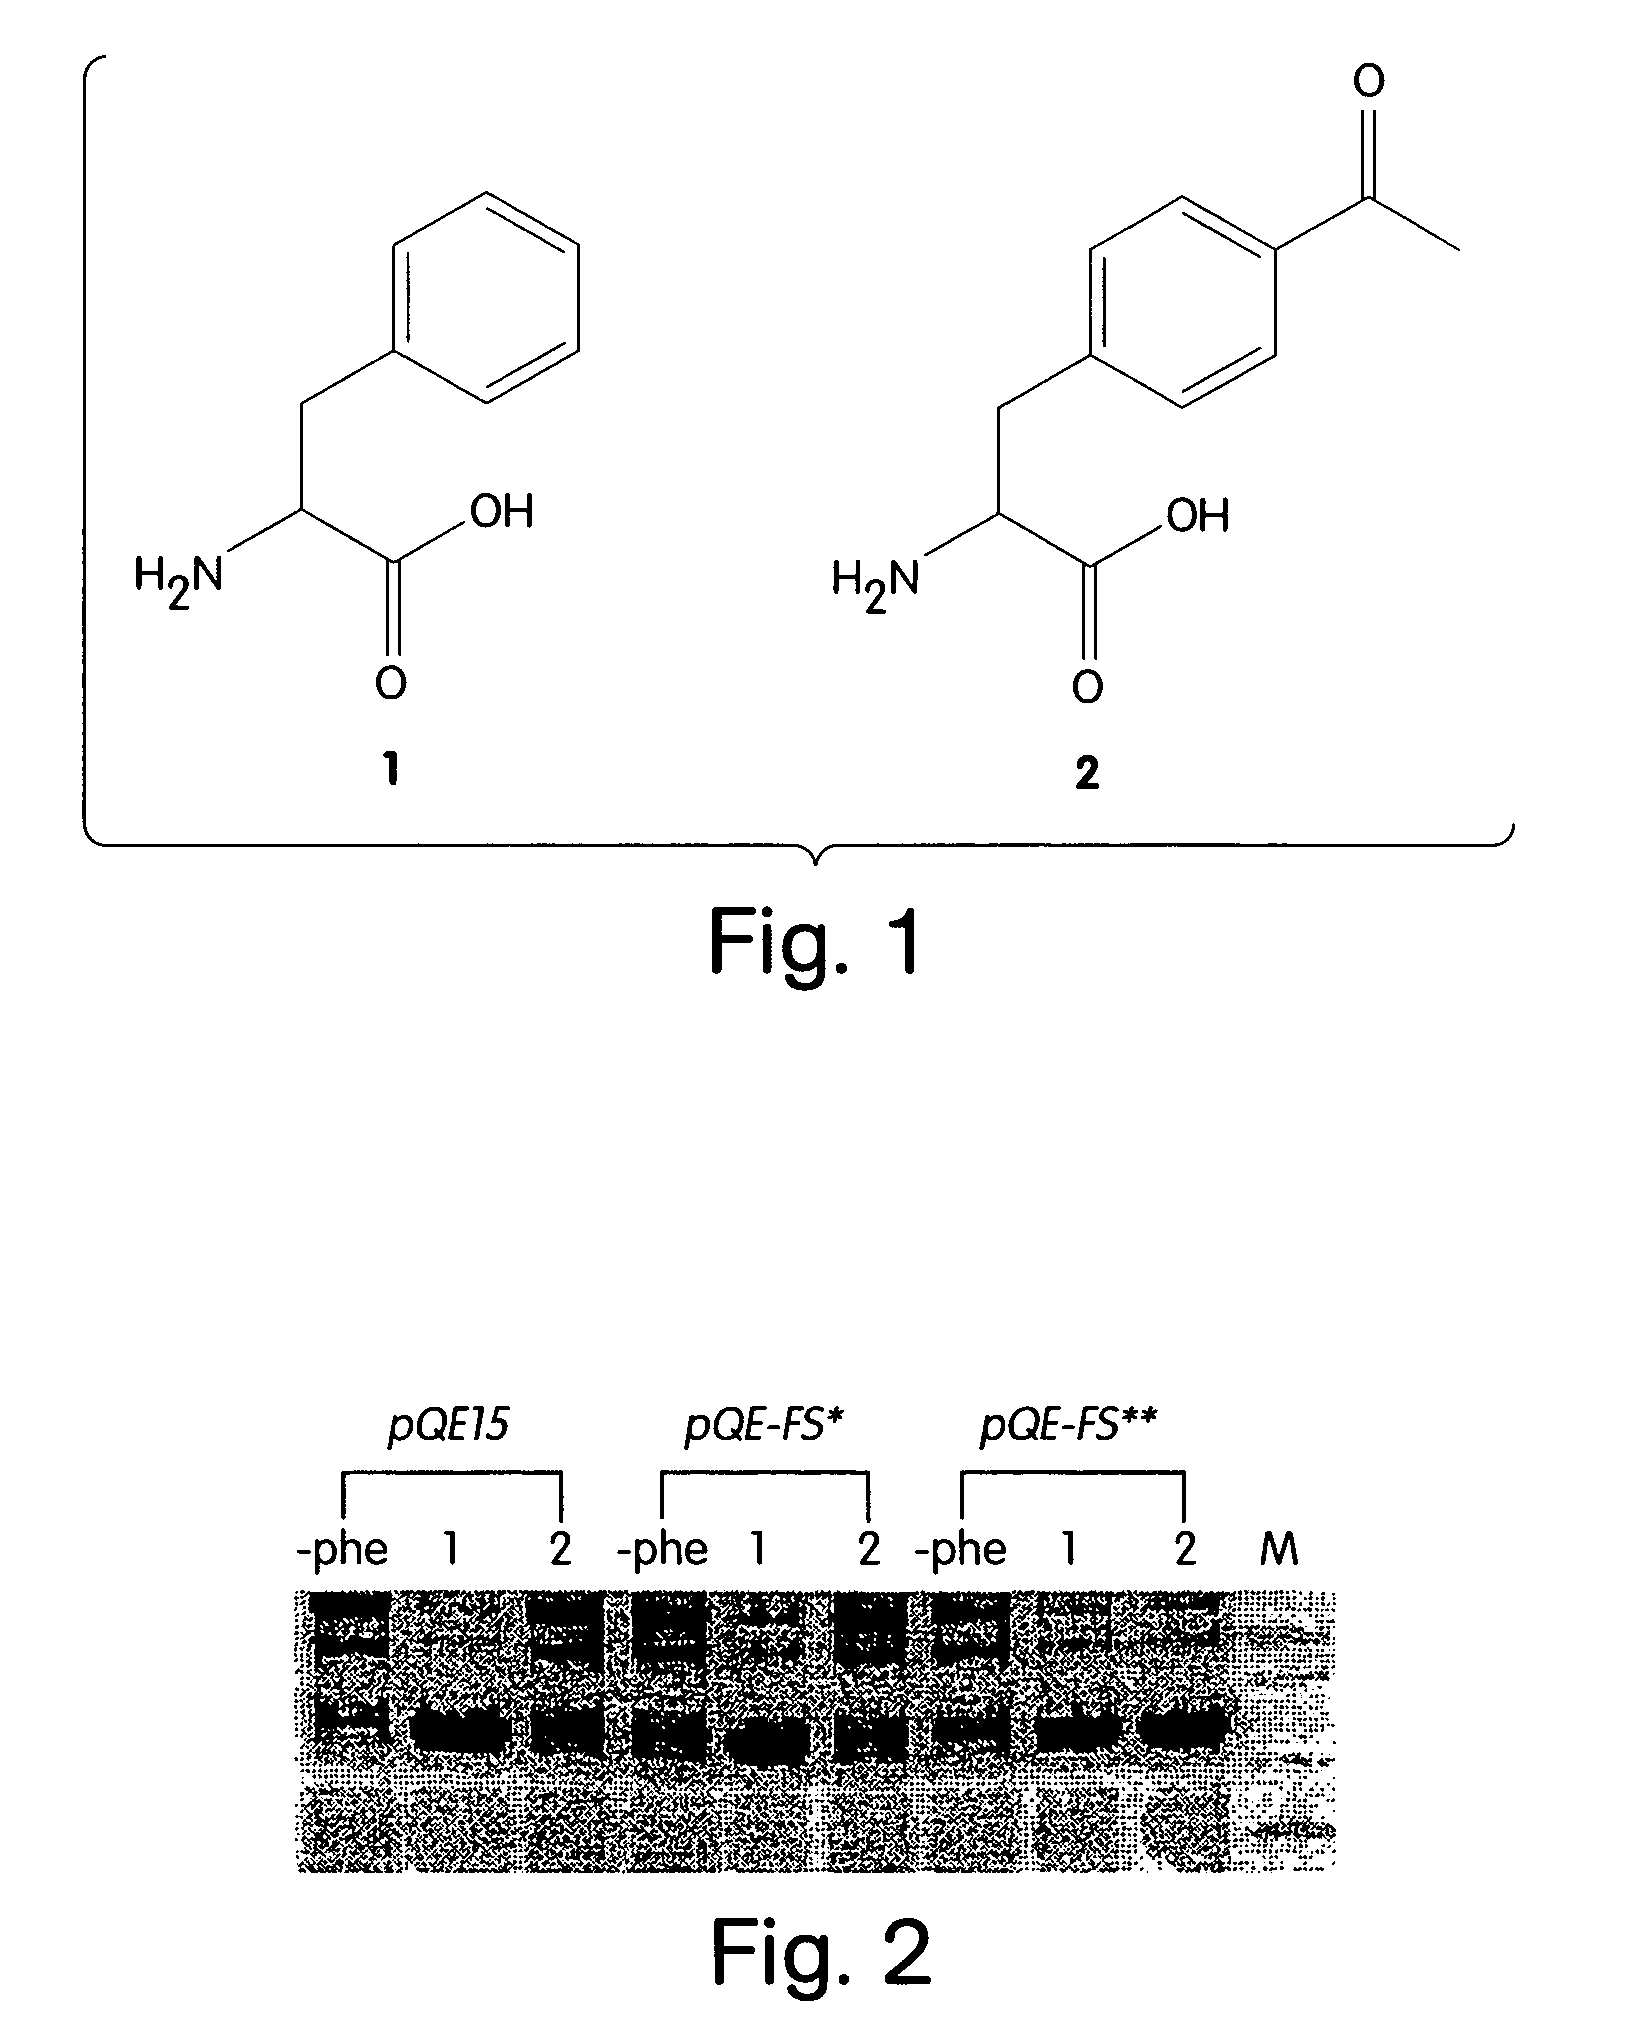 Computational method for designing enzymes for incorporation of non natural amino acids into proteins